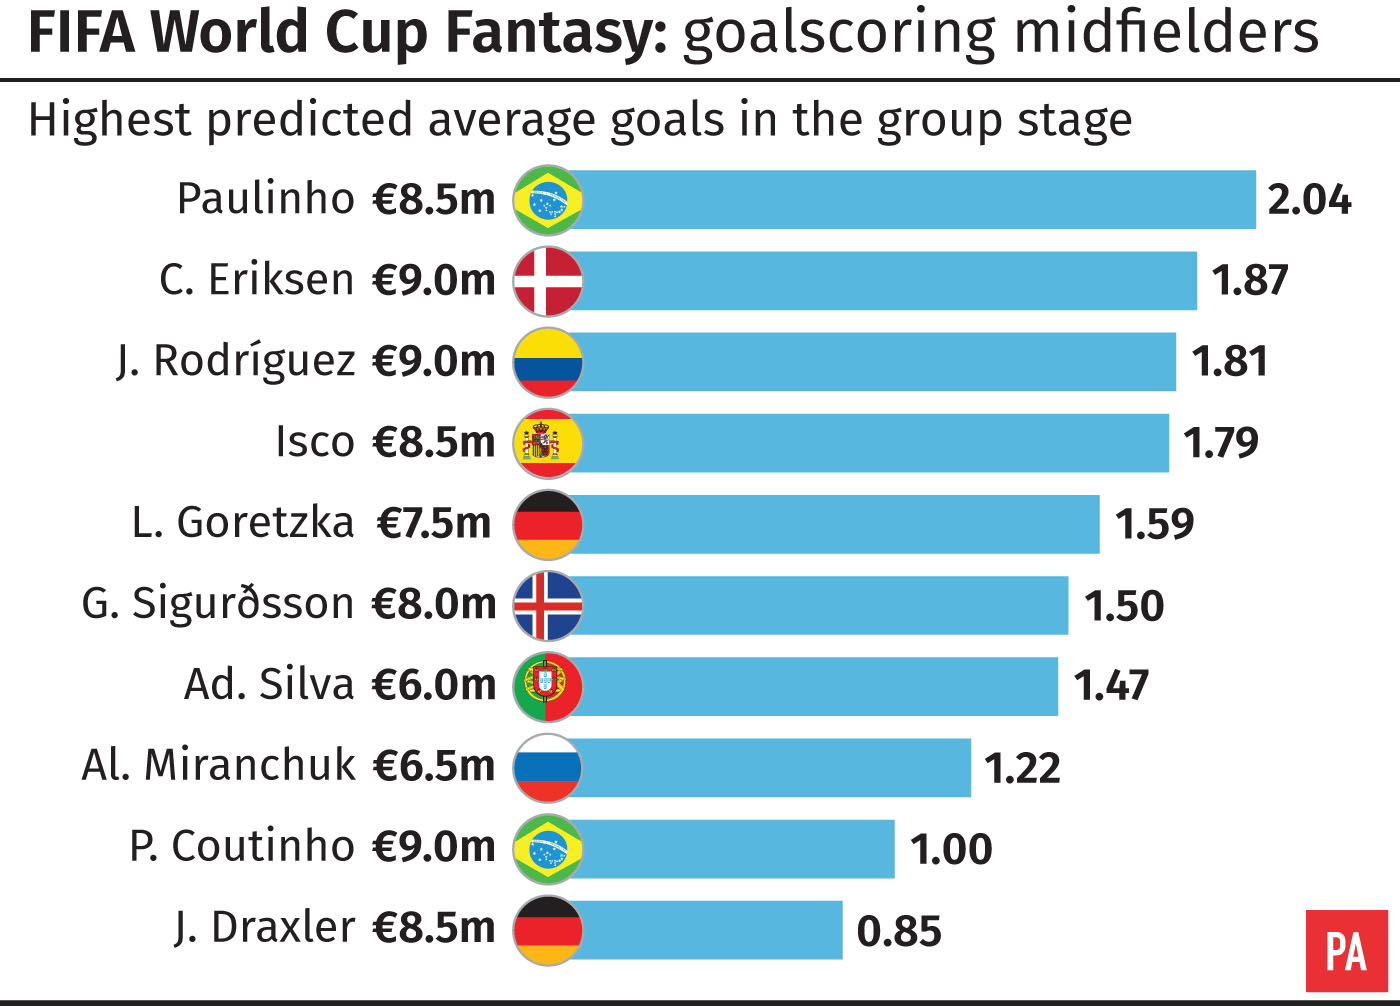 Here’s how the stats say you should set up your World Cup fantasy